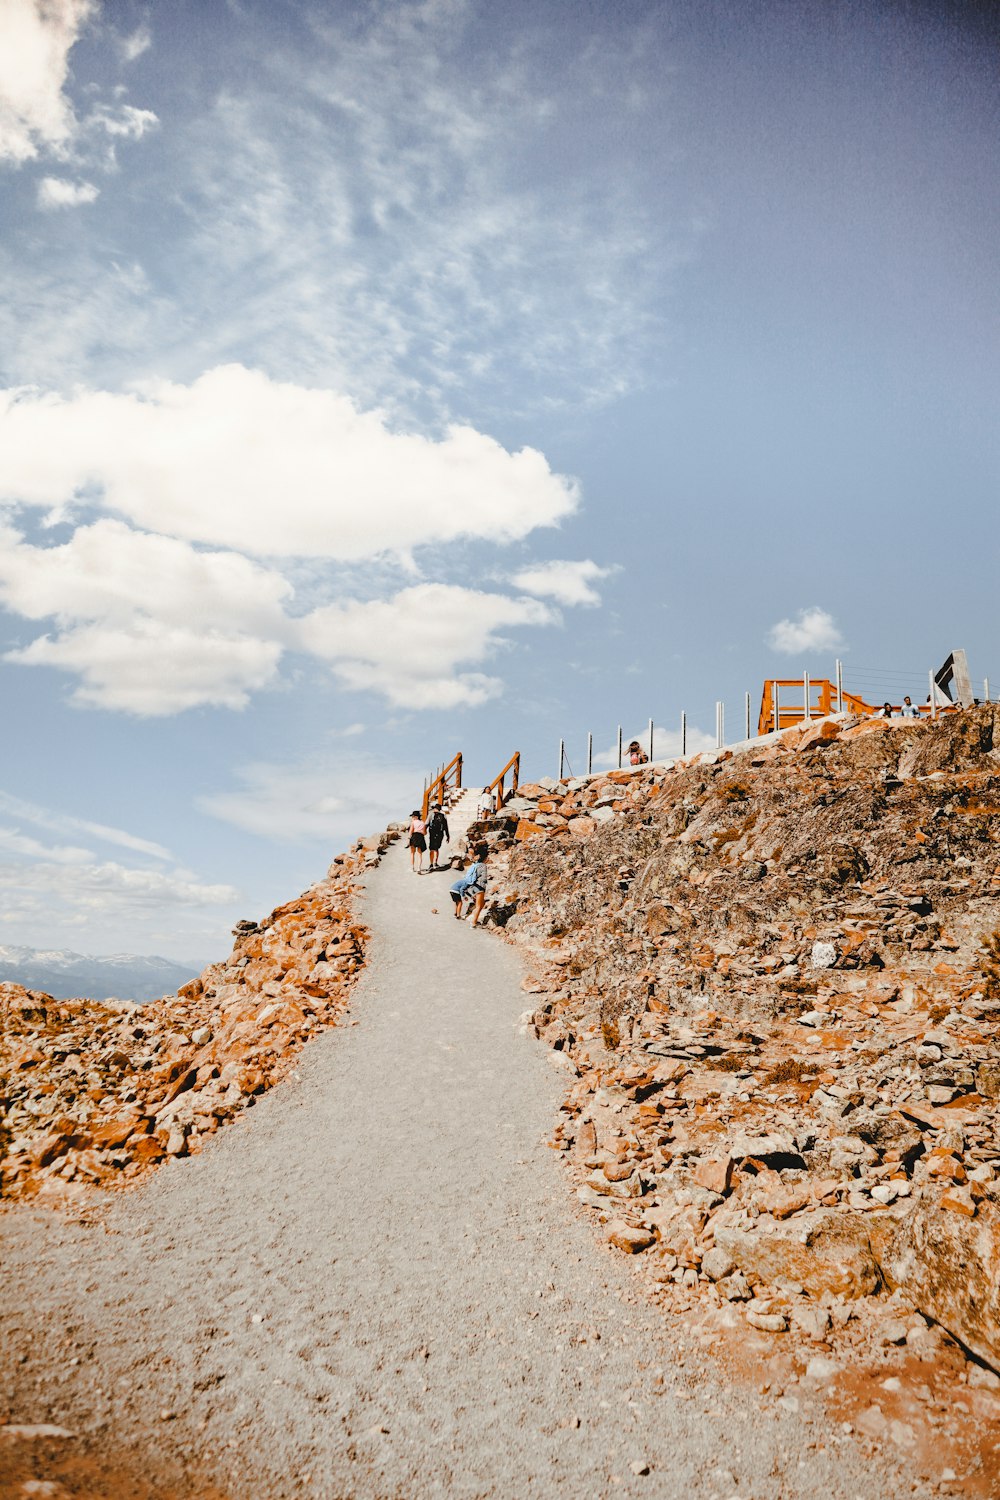 people walking on rocky field under blue and white sunny cloudy sky during daytime